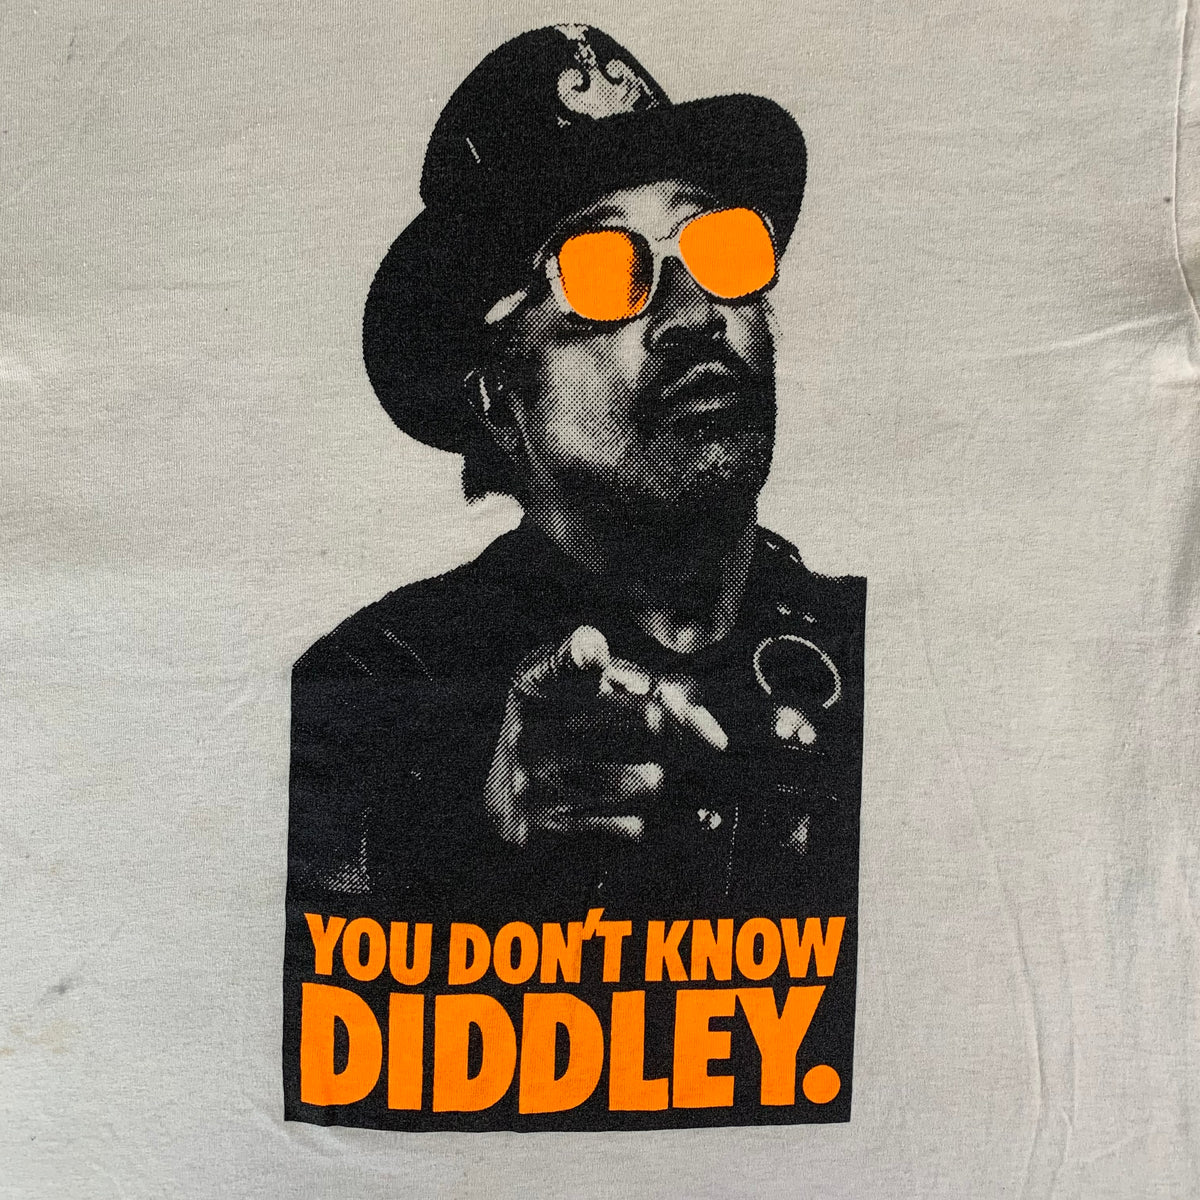 Vintage Nike &quot;You Don&#39;t Know Diddley.&quot; T-Shirt